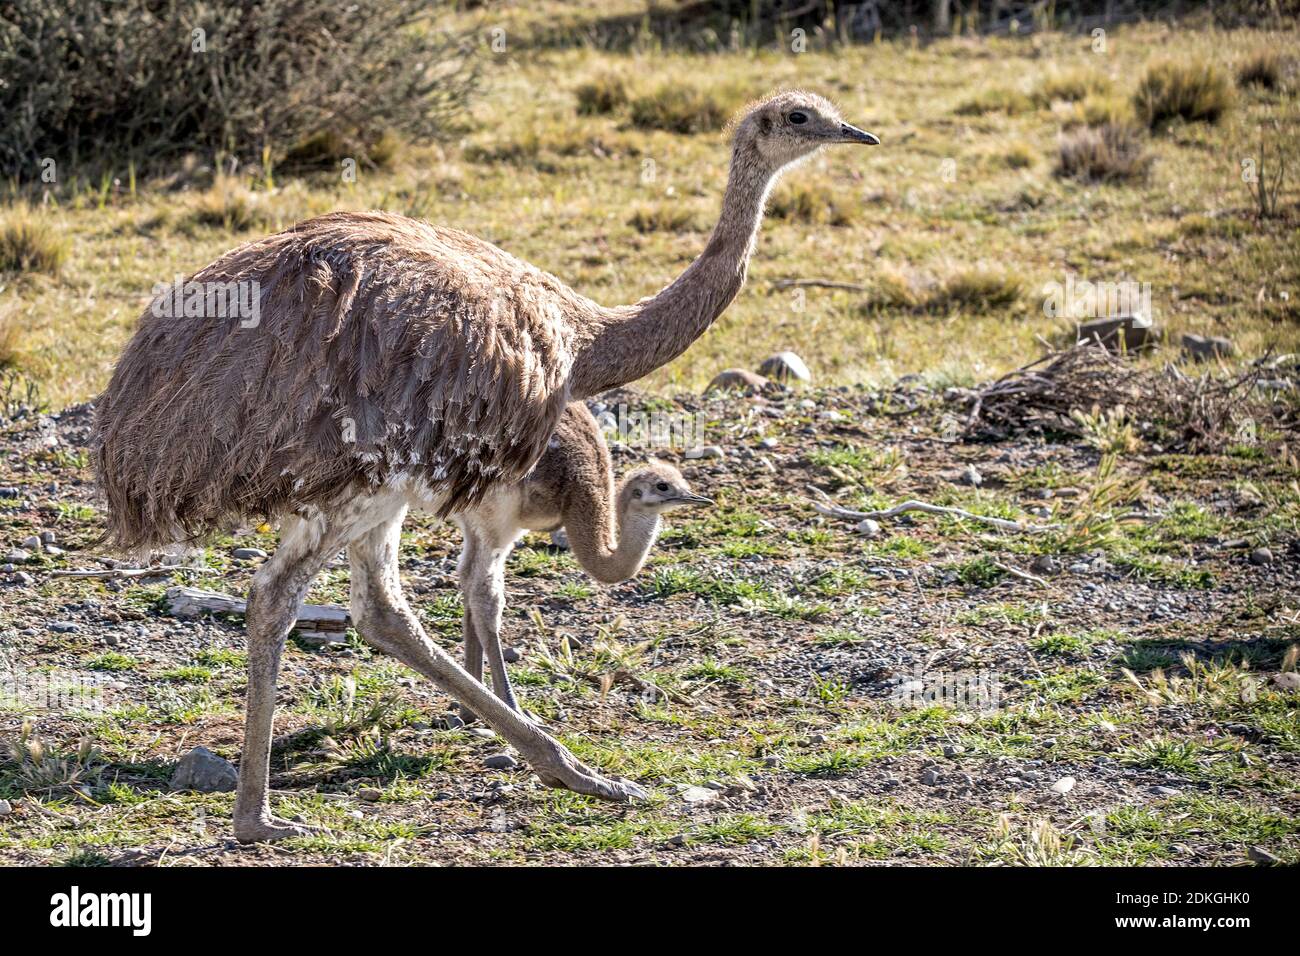 Rhea with cub in Patagonia Stock Photo